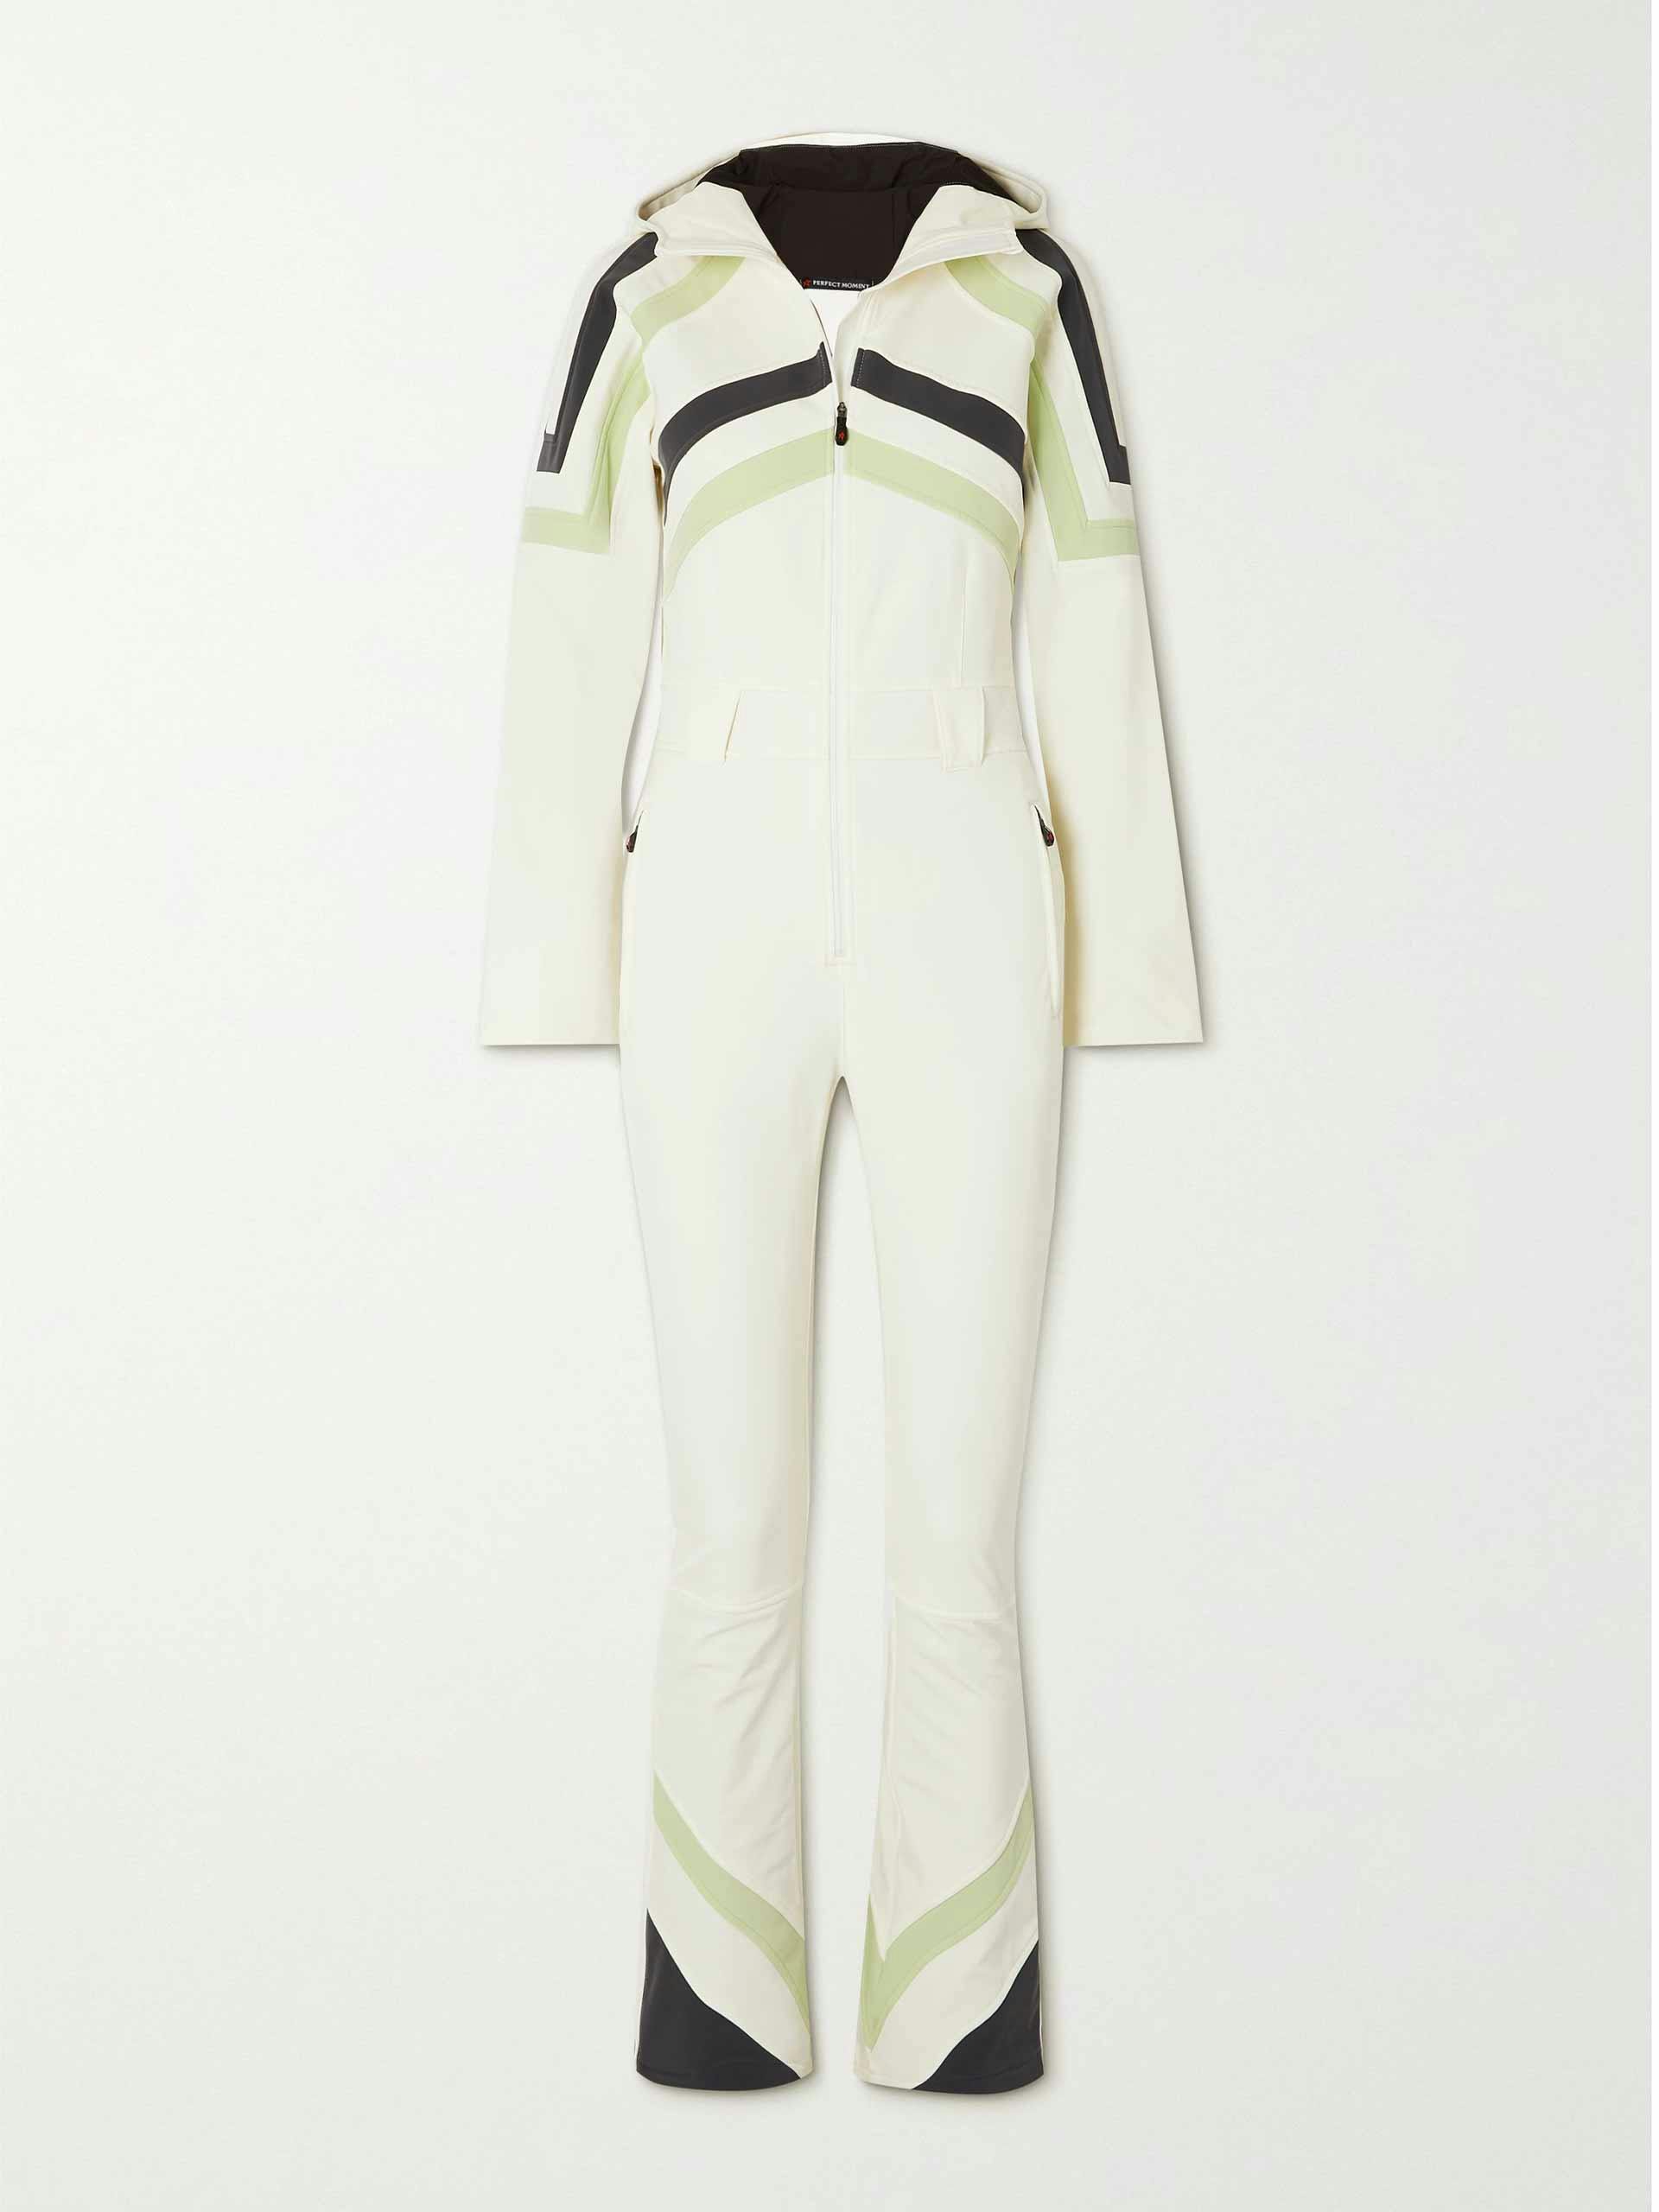 Hooded striped ski suit